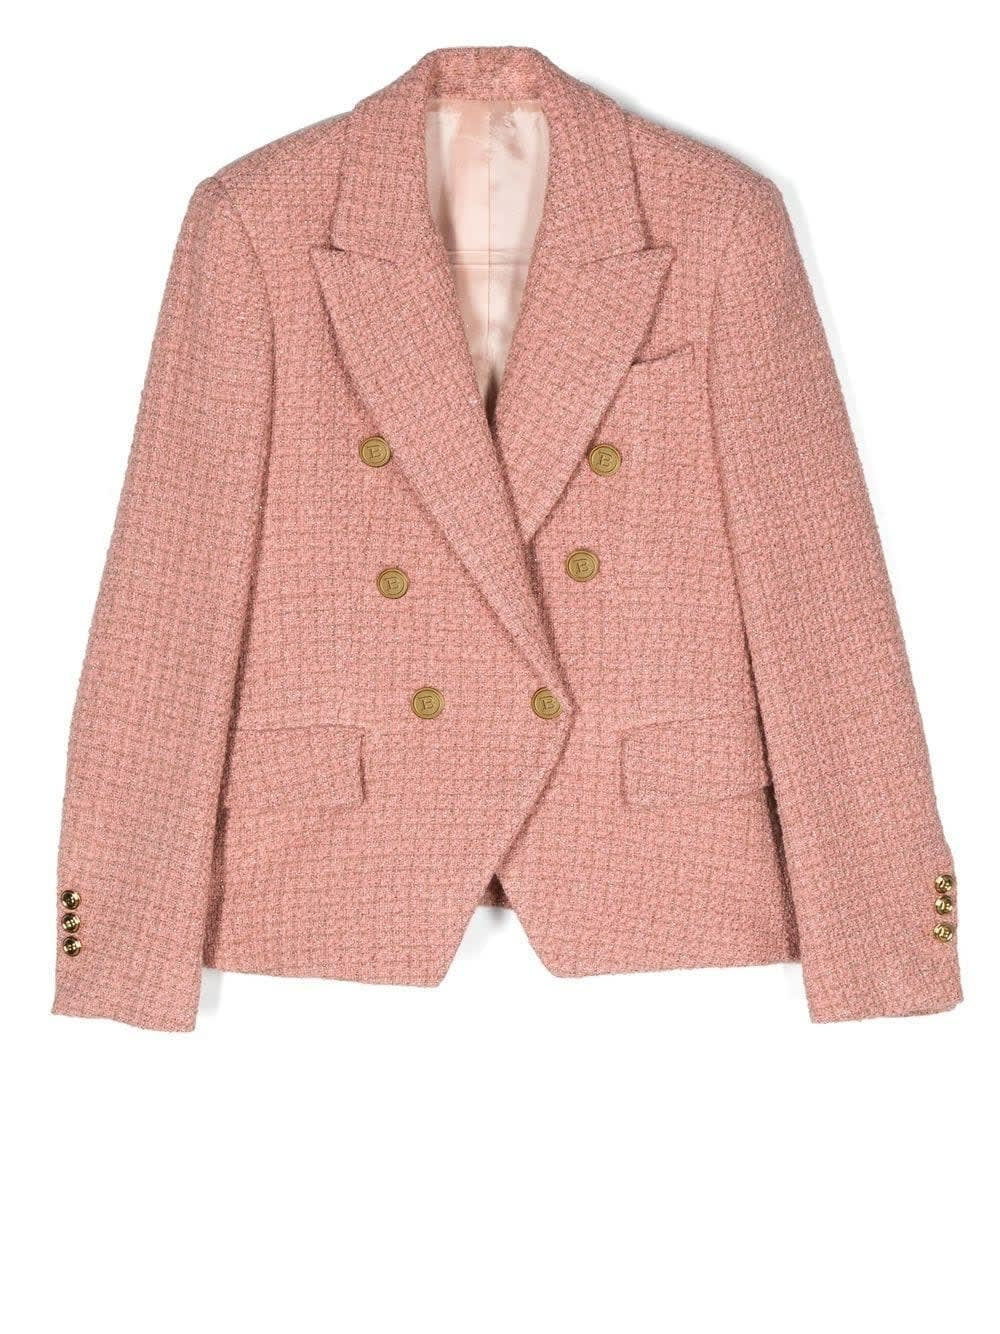 Balmain Kids Double-breasted Blazer In Light Pink Tweed With Embossed Gold Buttons